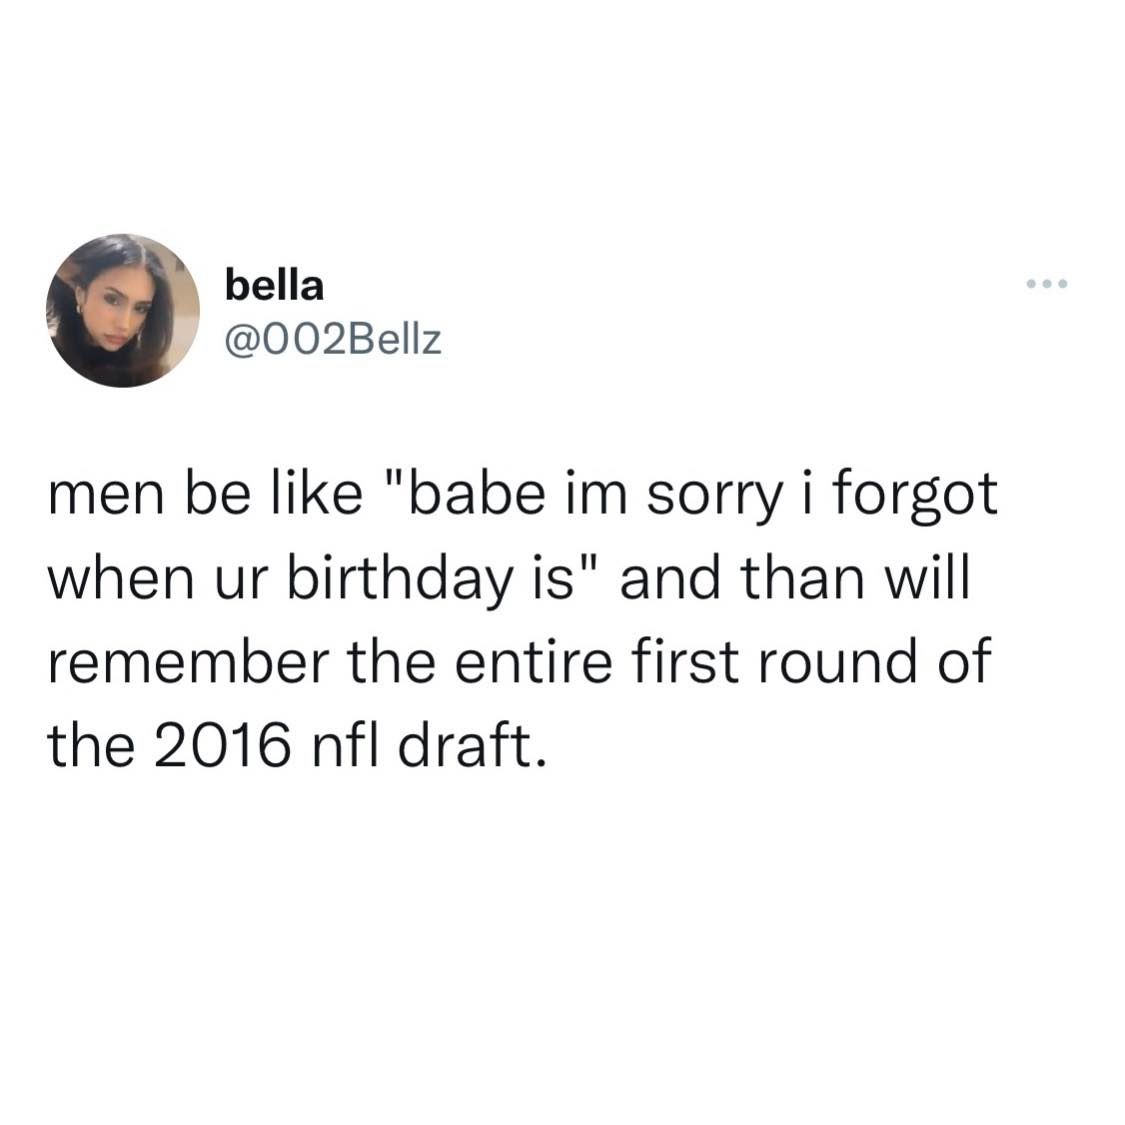 NFL football memes - support your man in everything he does - bella men be "babe im sorry i forgot when ur birthday is" and than will remember the entire first round of the 2016 nfl draft.